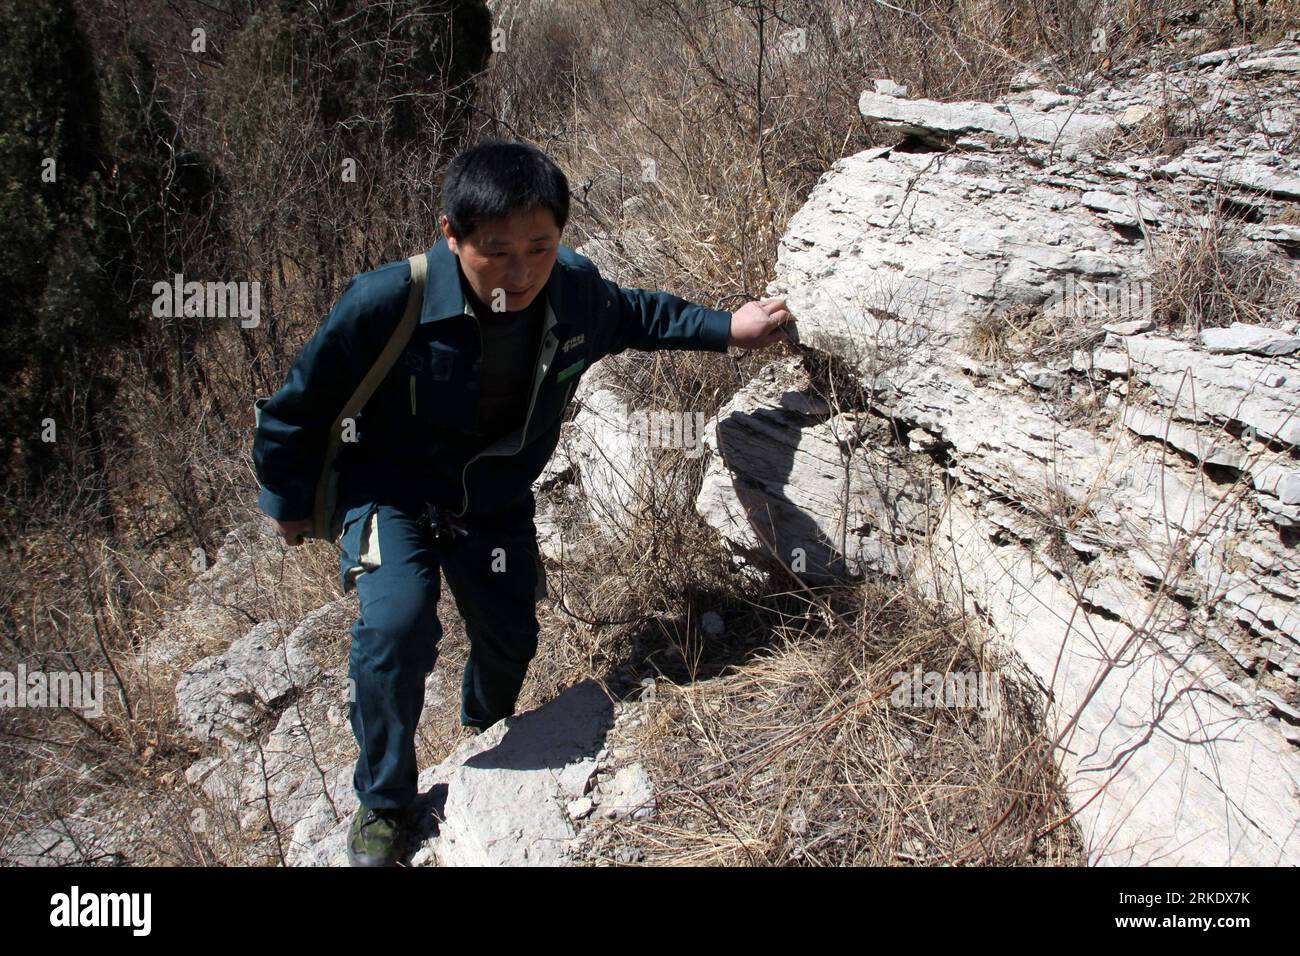 Bildnummer: 55014205  Datum: 09.03.2011  Copyright: imago/Xinhua (110311) -- QINGZHOU, March 11, 2011 (Xinhua) -- Postman Sun Jigang walks on a hill while delivering mails in Qingzhou, east China s Shandong Province, March 9, 2011. Sun walks on a 34-kilometer-long post path in the remote mountainous area every two days to deliver mails for 13 villages along the way. It has been five years since Sun started the job and he is the only postman serving on the path. (Xinhua/Sun Shubao) (hdt)  CHINA-SHANDONG-SUN JIGANG-POSTMAN (CN) PUBLICATIONxNOTxINxCHN Gesellschaft Arbeitswelten Post Briefträger C Stock Photo